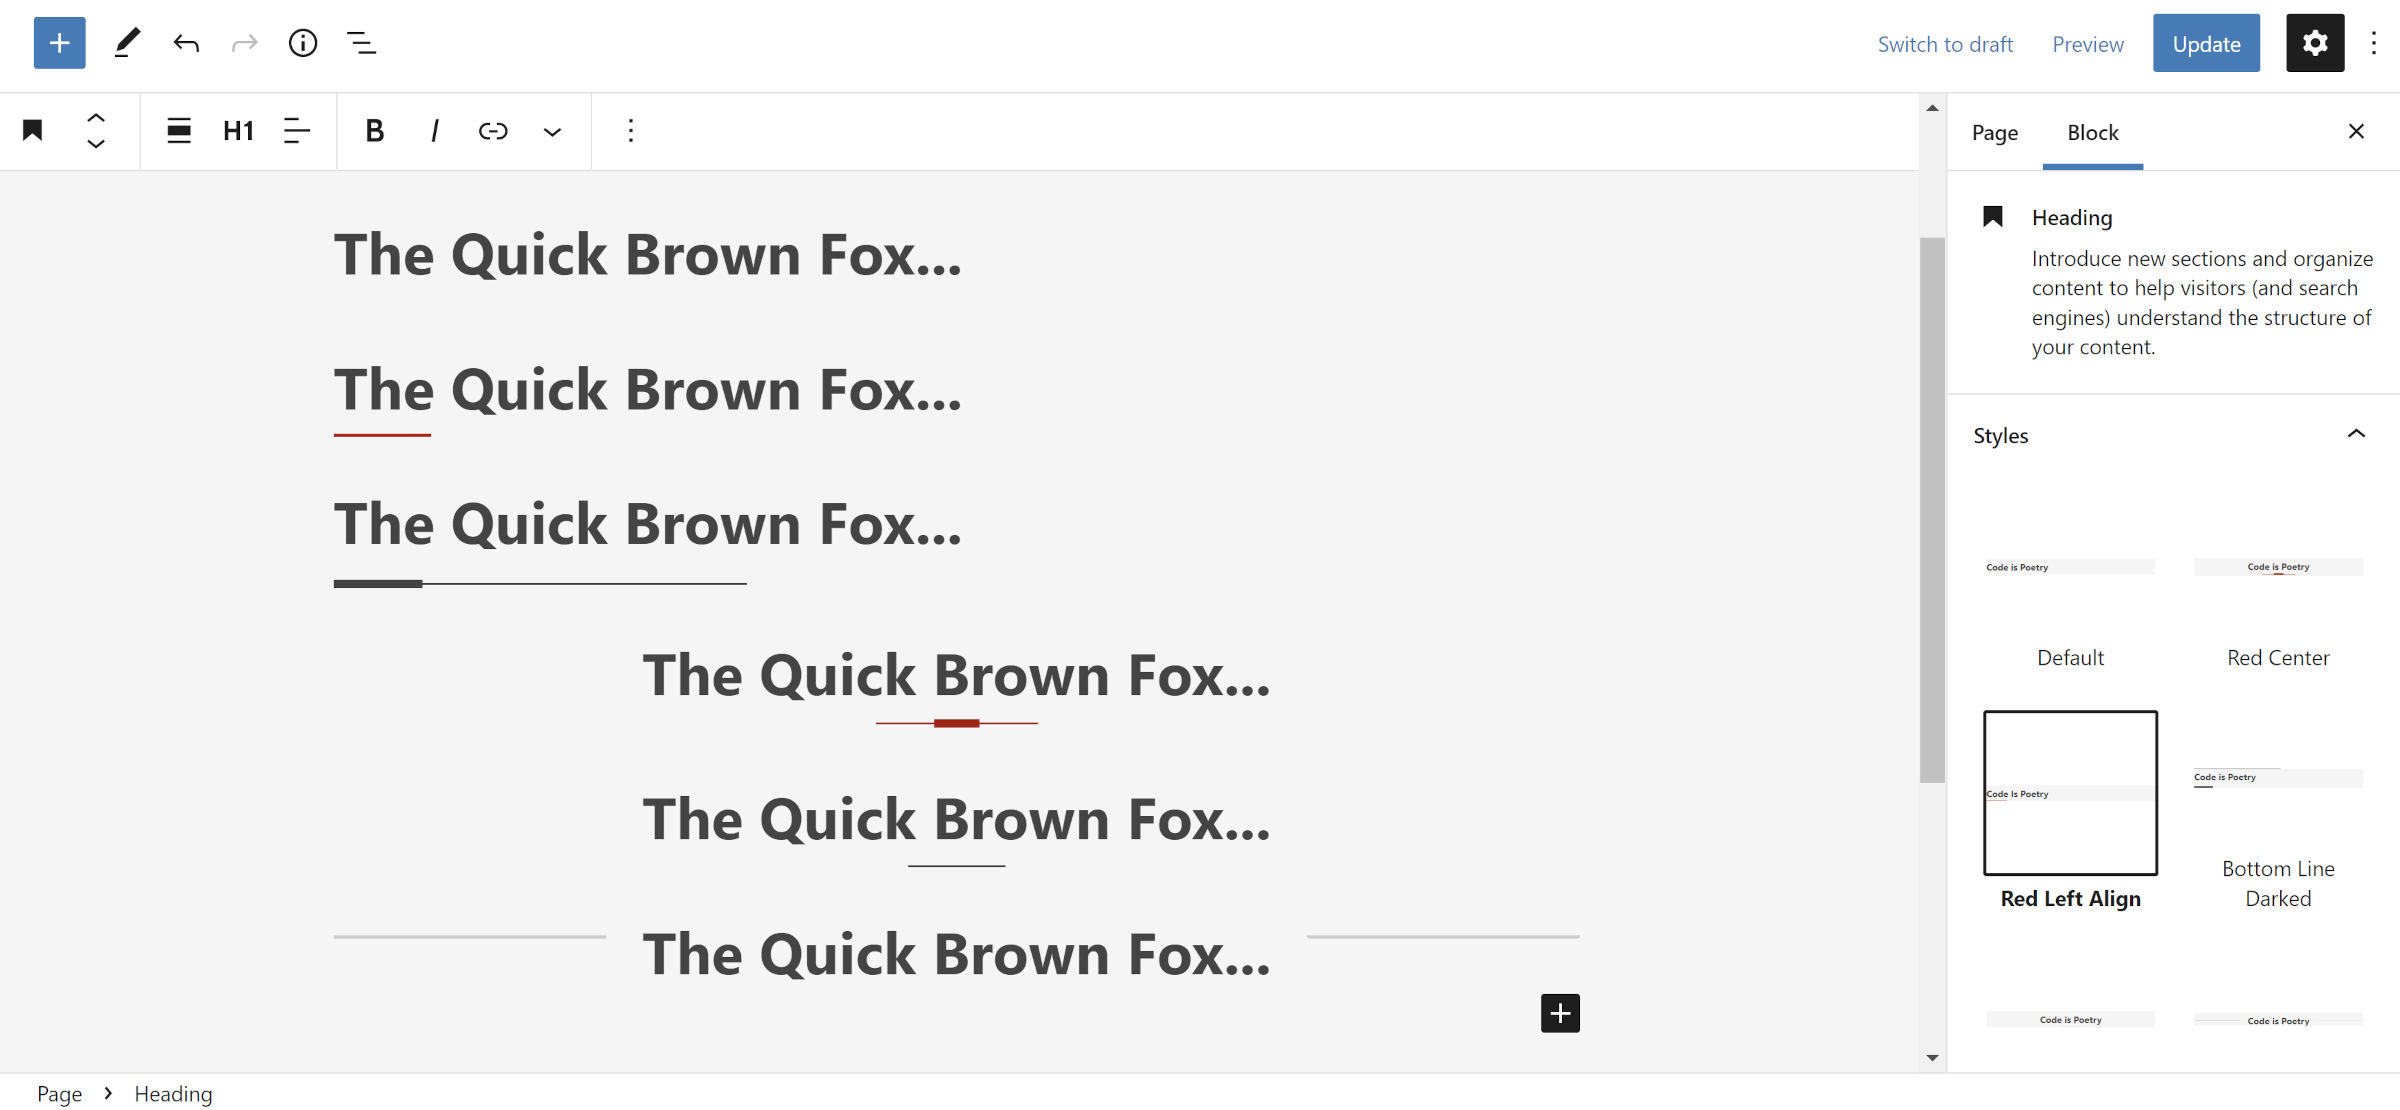 WordPress post editor with six Heading blocks.  Each has a different design.